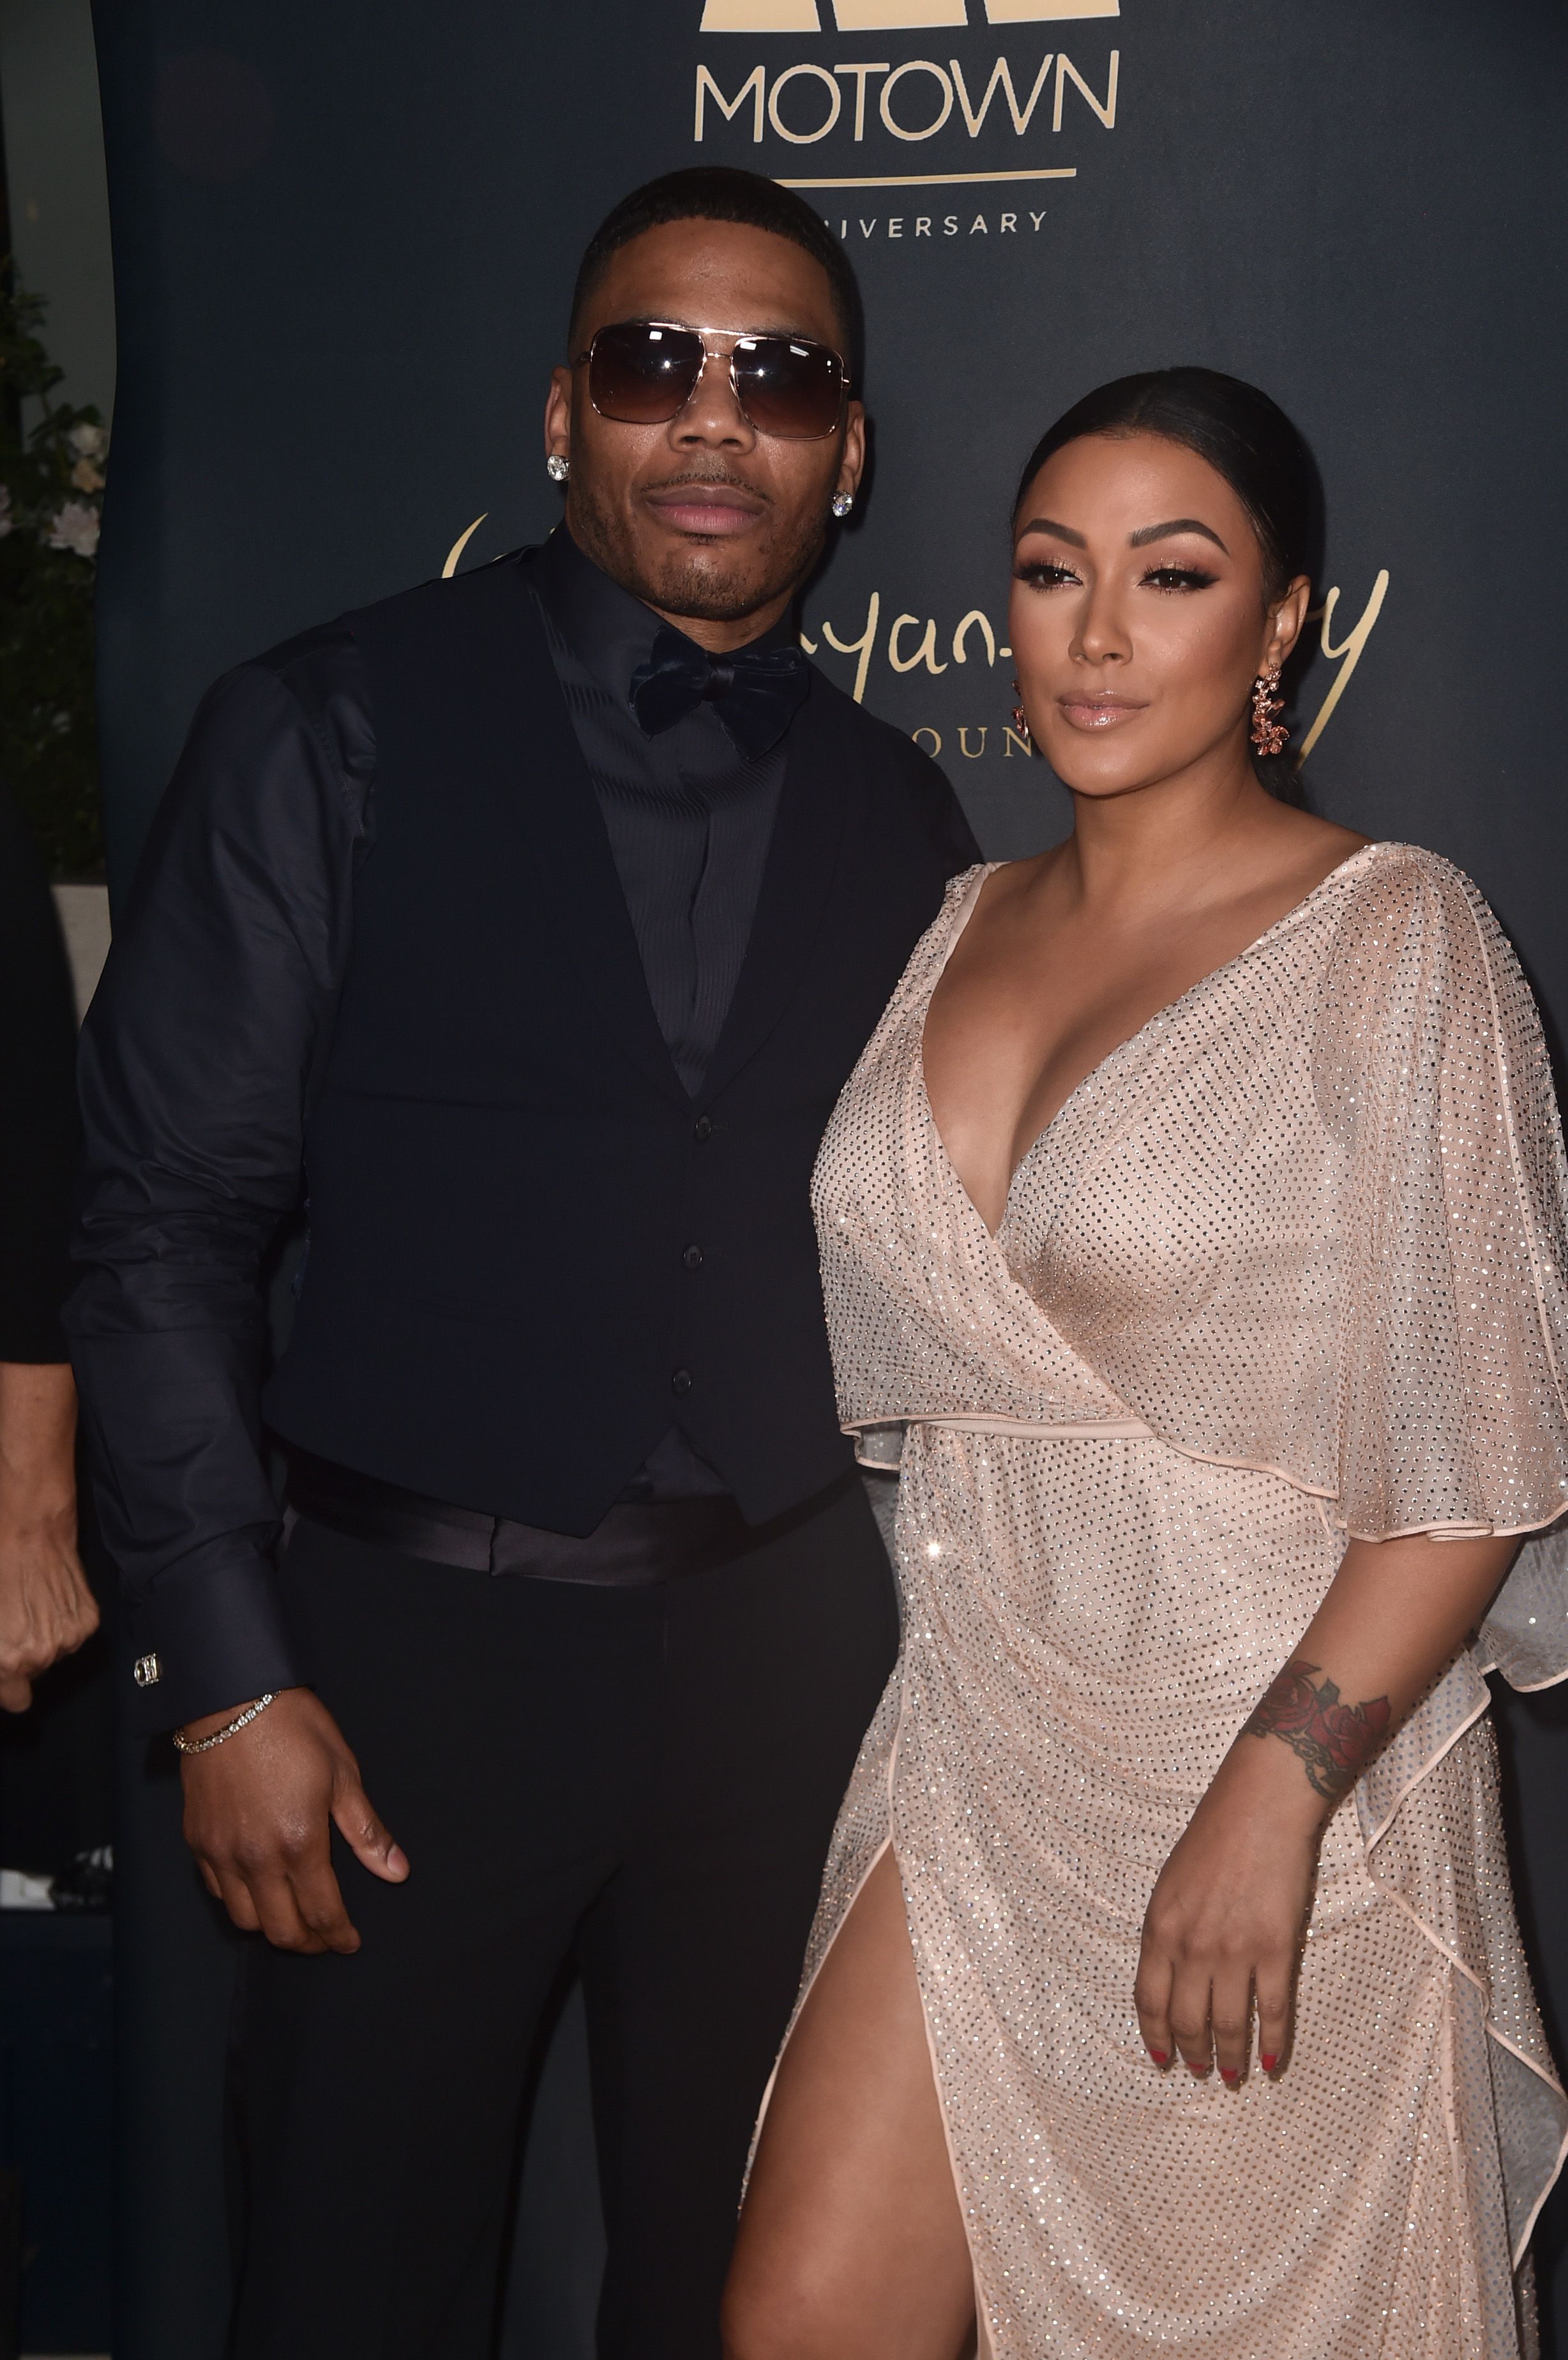 Nelly and Shantel Jackson at The Ryan Gordy Foundation's celebration of 60 Years Of Mowtown on November 11, 2019 | Photo: Getty Images